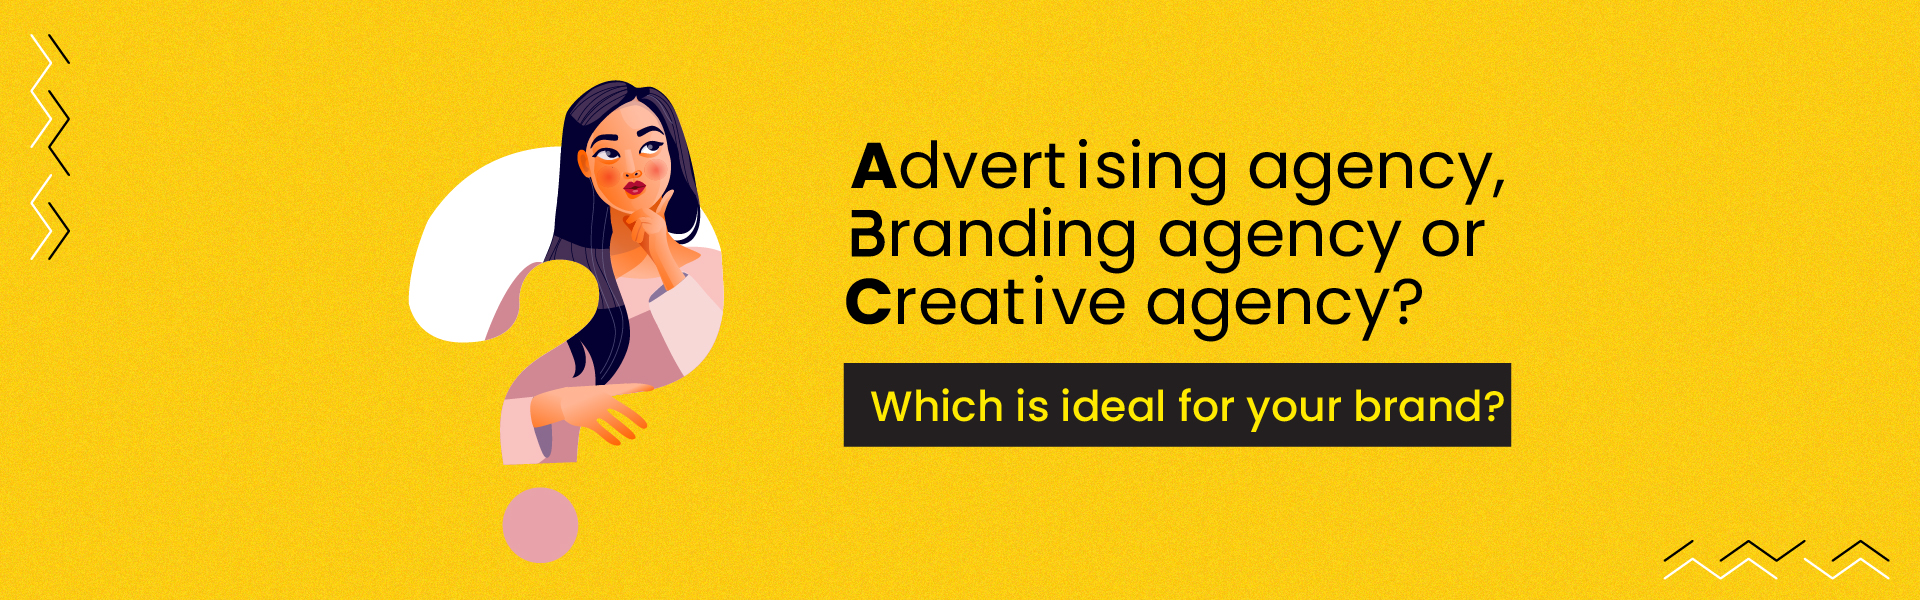 Creative agency or branding agency or advertising agency – which is ideal for your brand